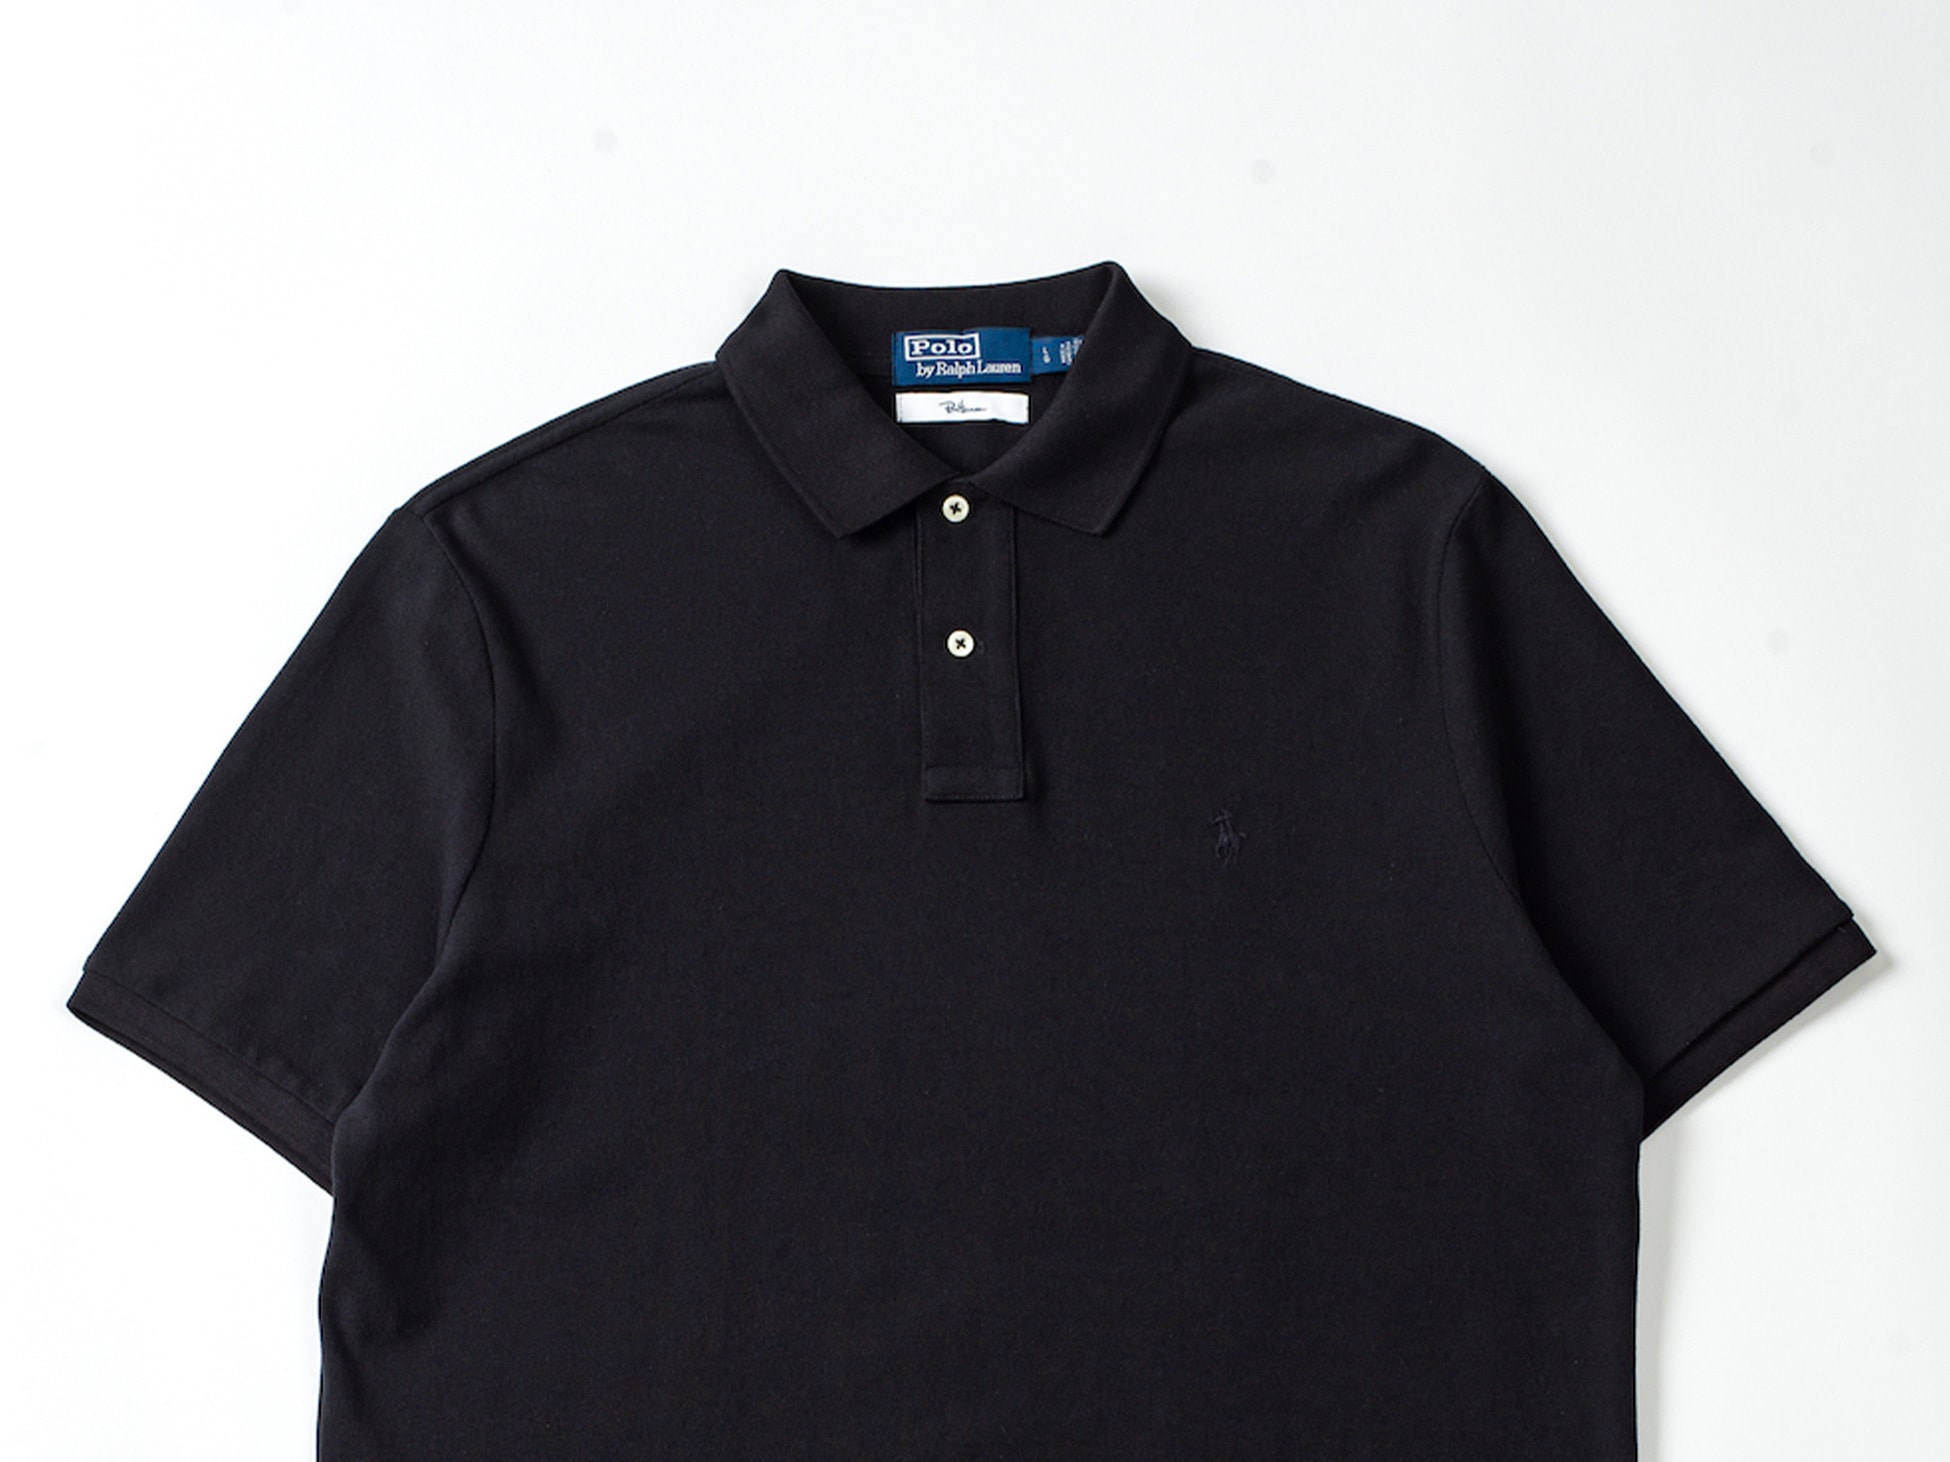 Polo Ralph Lauren for Ron Herman Black Collection Polo Shirt 6.11(Sat) Re-Stock @ Ron Herman Online Store